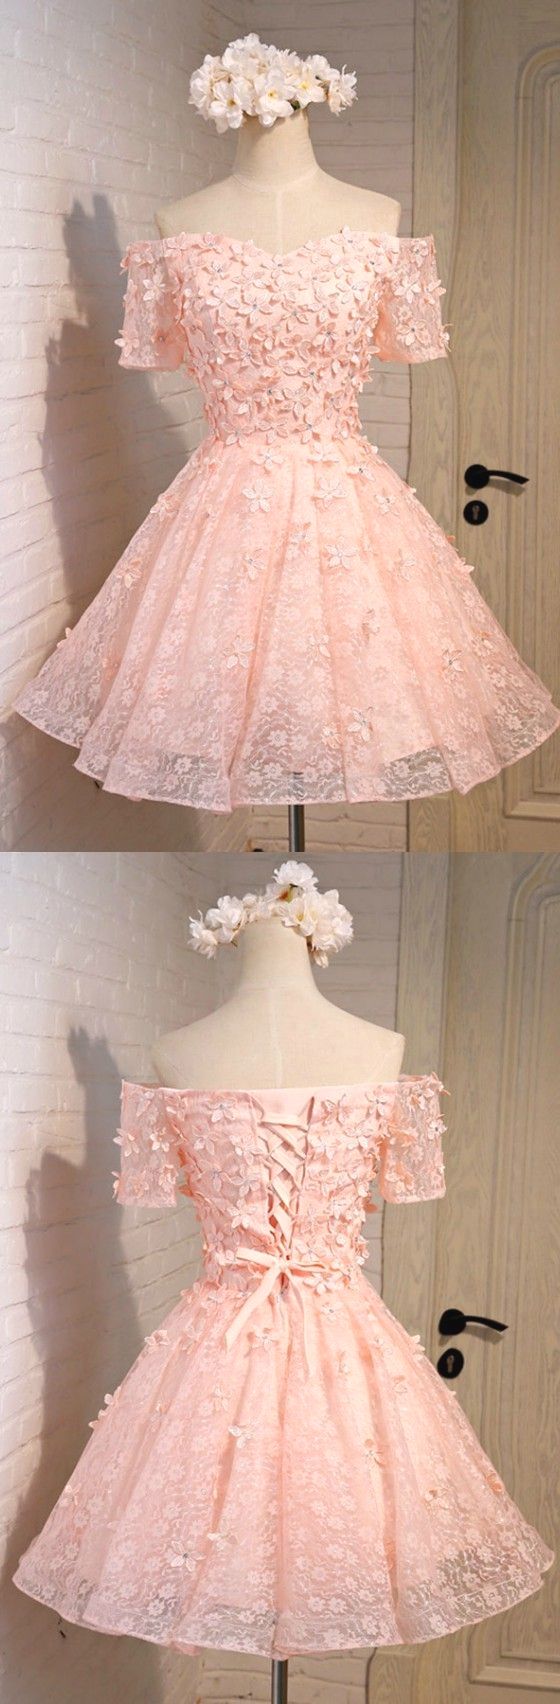 Off-The-Shoulder Short Tulle Homecoming Dresses Simone With Flowers CD169